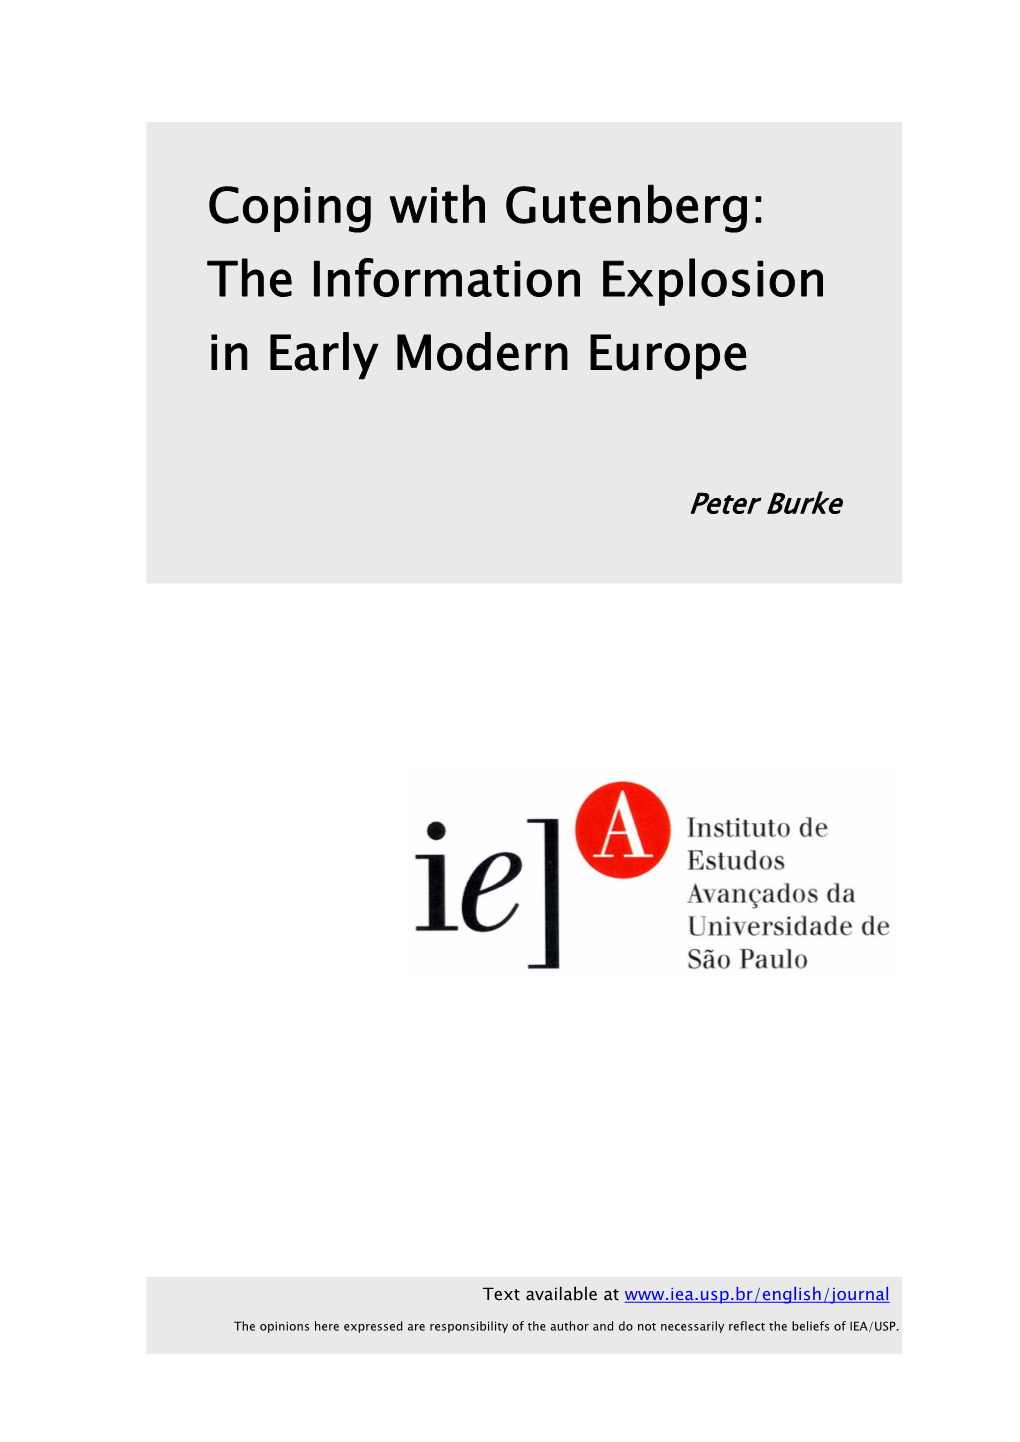 The Information Explosion in Early Modern Europe